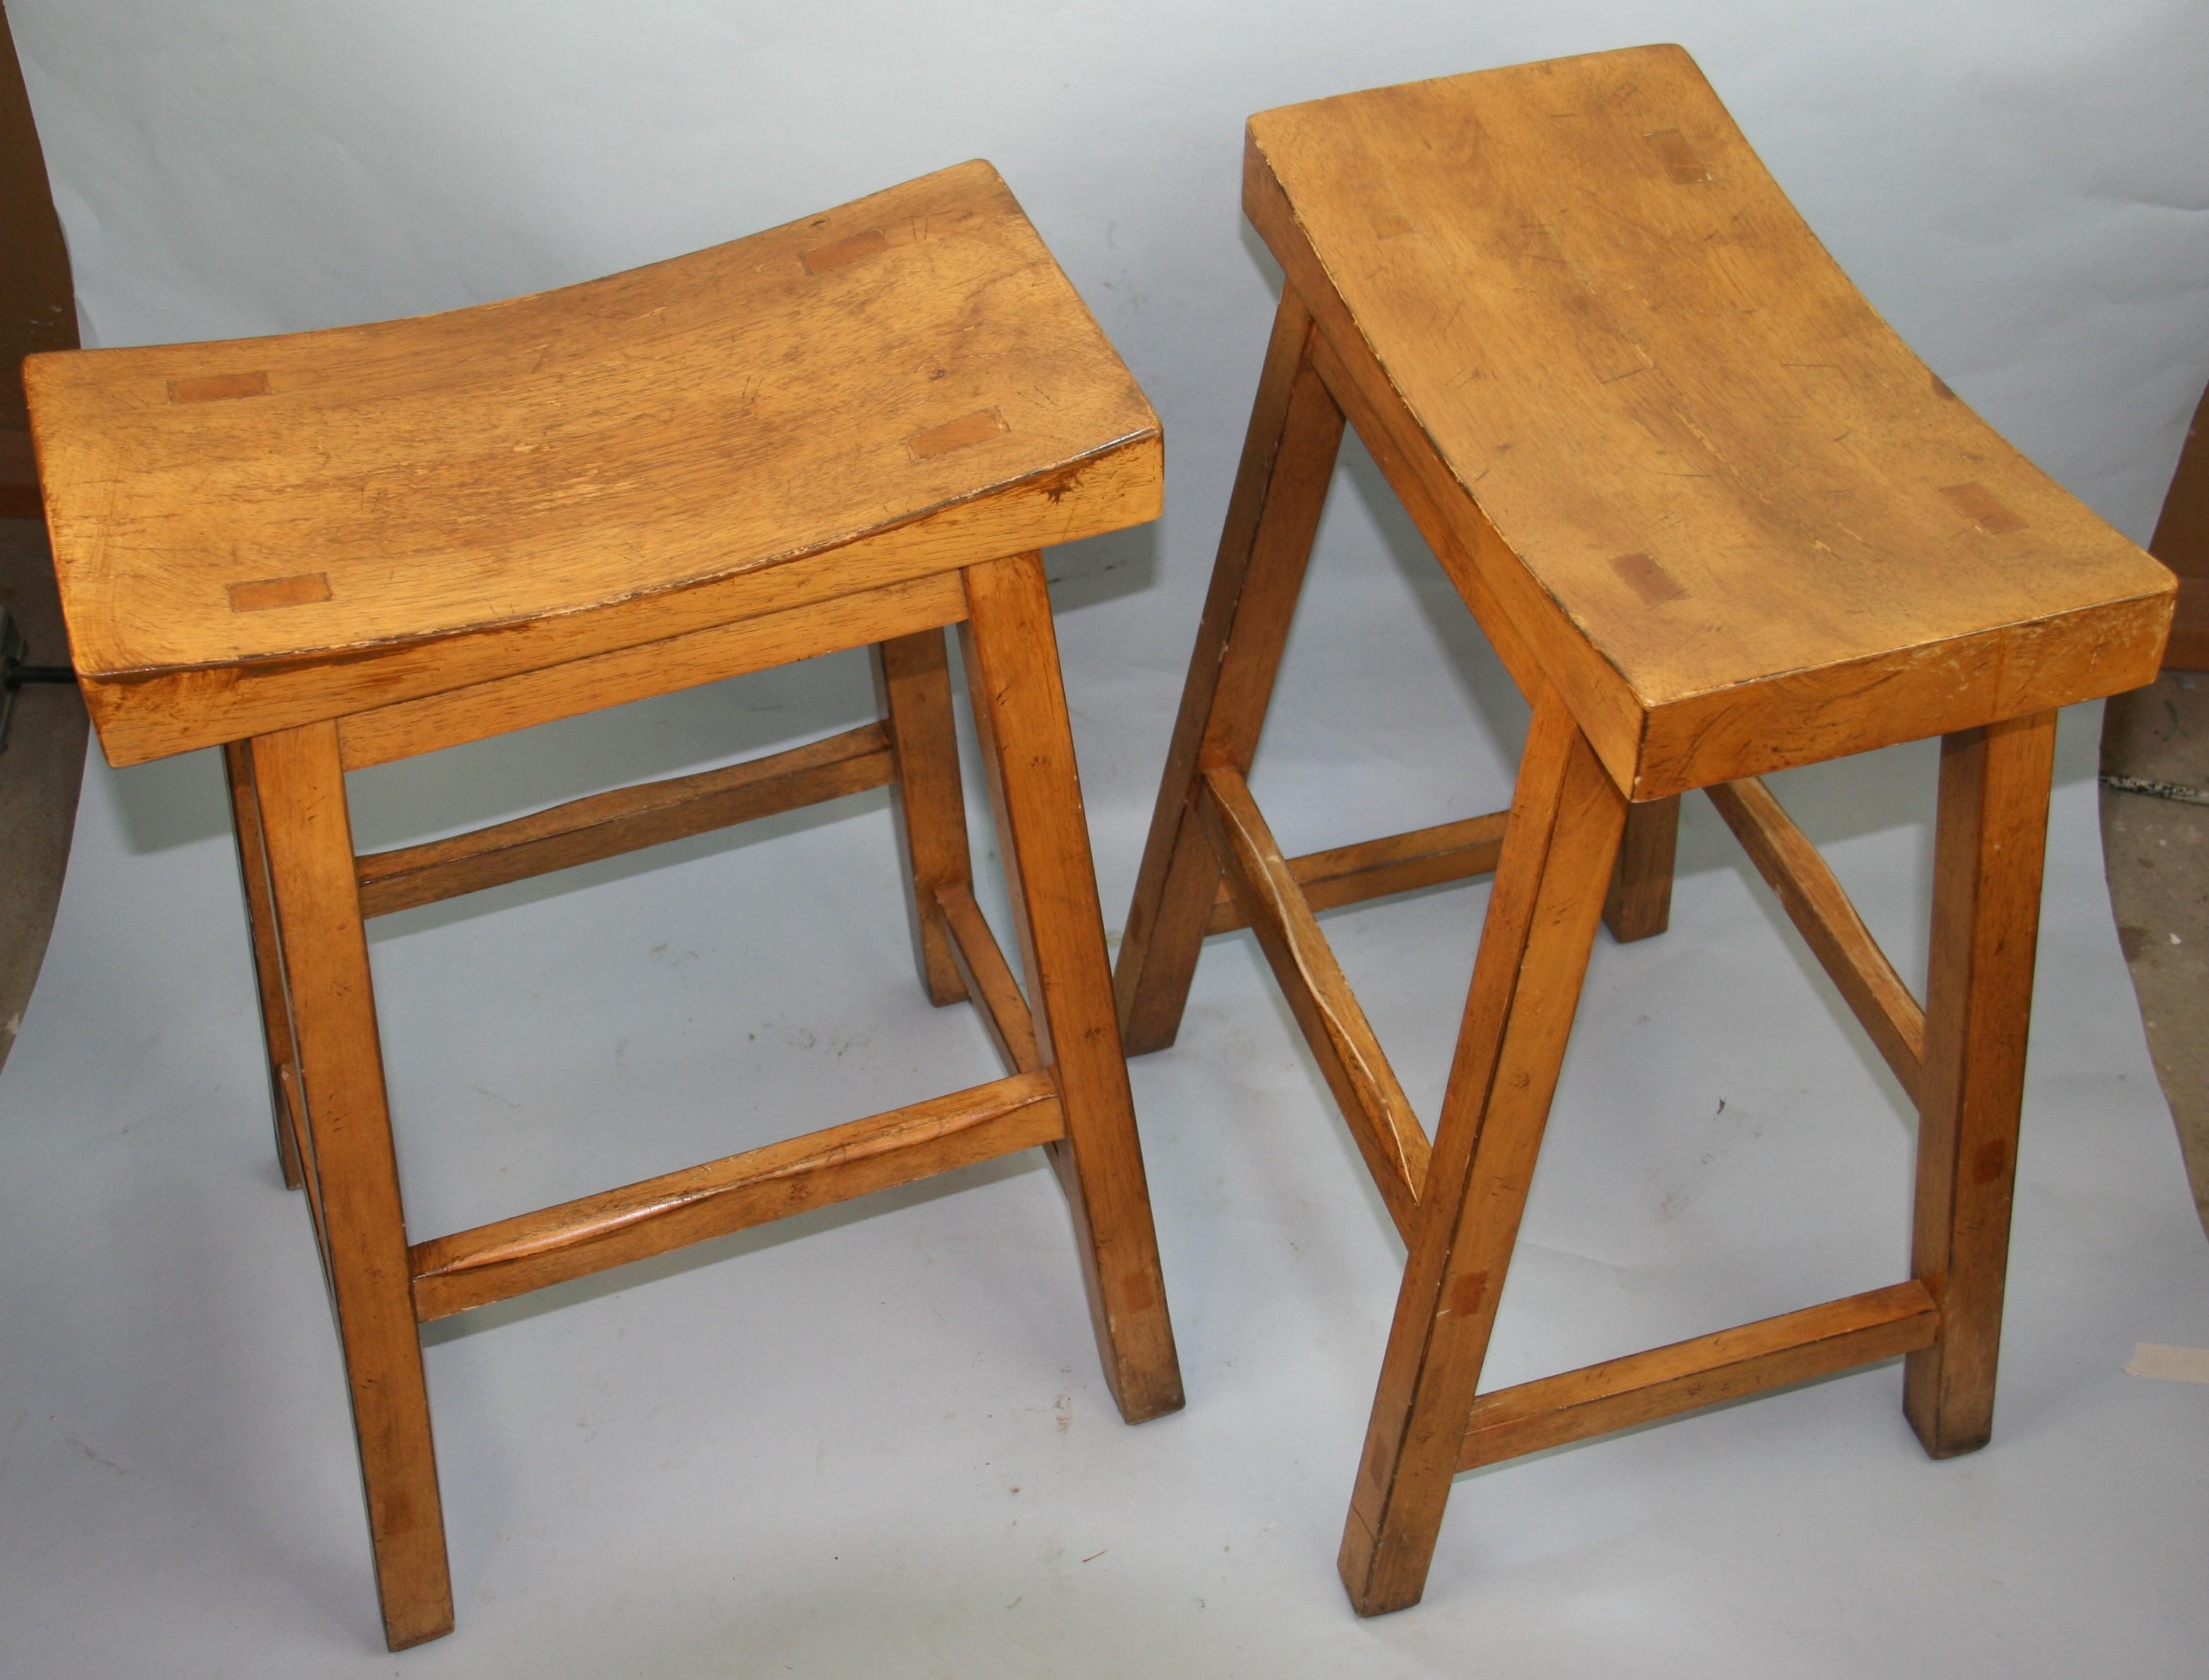 Pair Scandinavian curved top solid beech wood bar stools
with mortar and tensor construction.